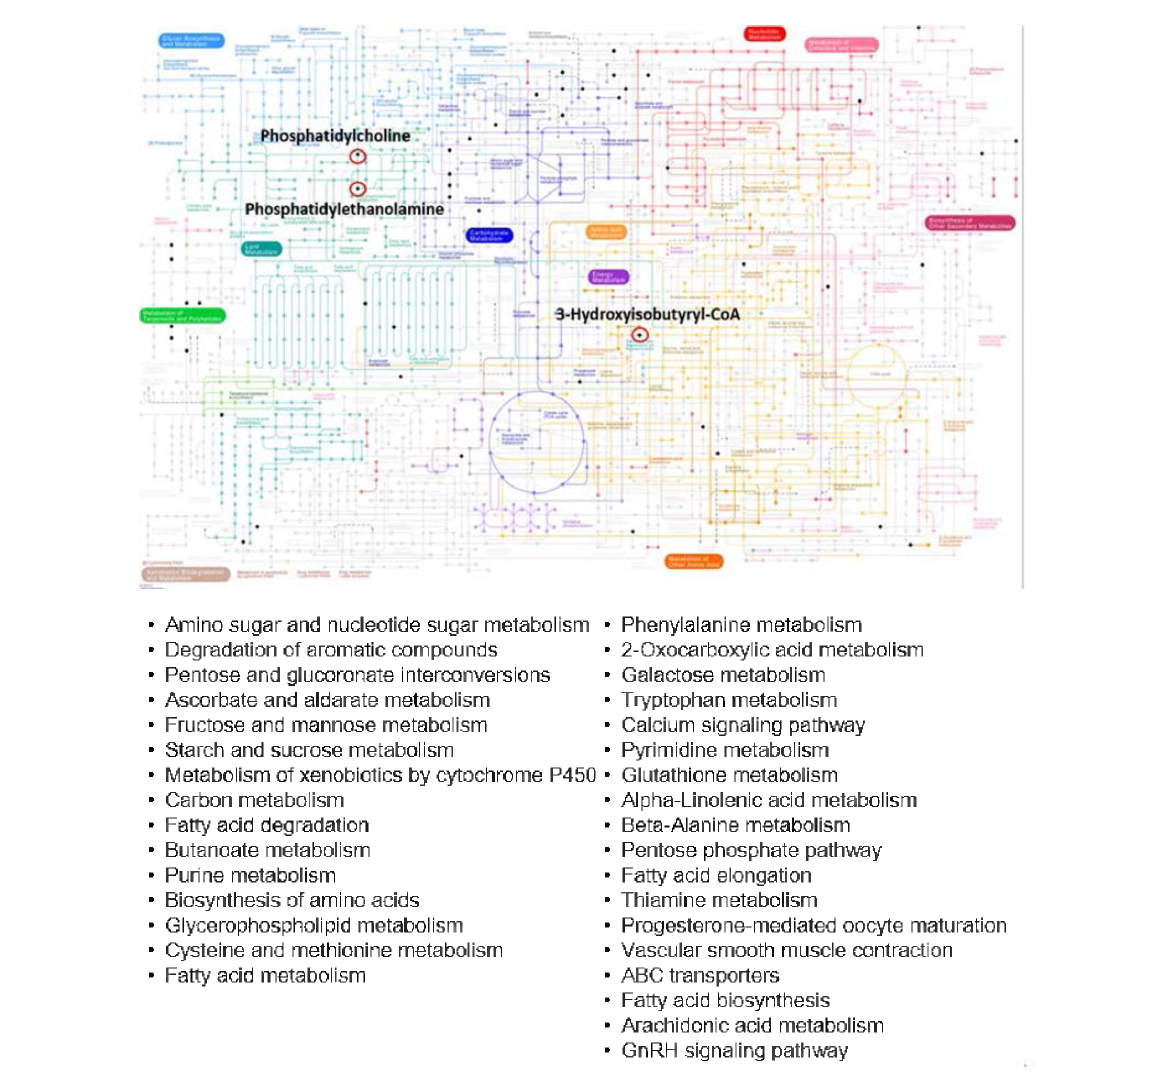 Pathway analysis of metabolites potentially affected in the metabolism of zebrafish after HBCD expos니re 니sing Kyoto Encyclopedia of Genes and Genomes